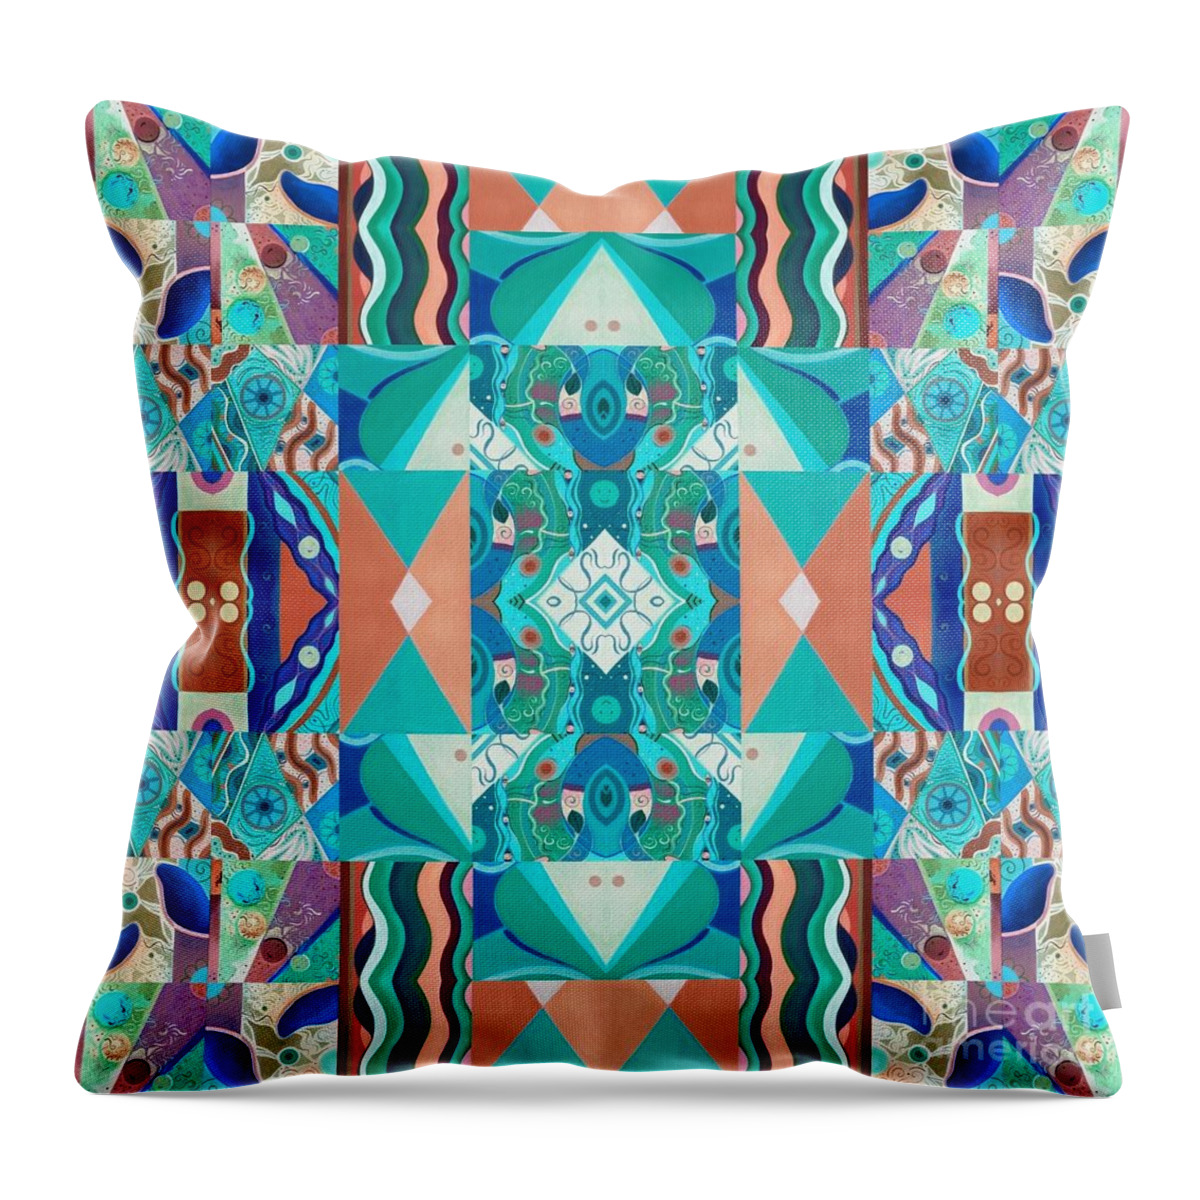 The Joy Of Design Mandala Series Puzzle 8 Arrangement 4 Inverted By Helena Tiainen Throw Pillow featuring the painting The Joy of Design Mandala Series Puzzle 8 Arrangement 4 Inverted by Helena Tiainen